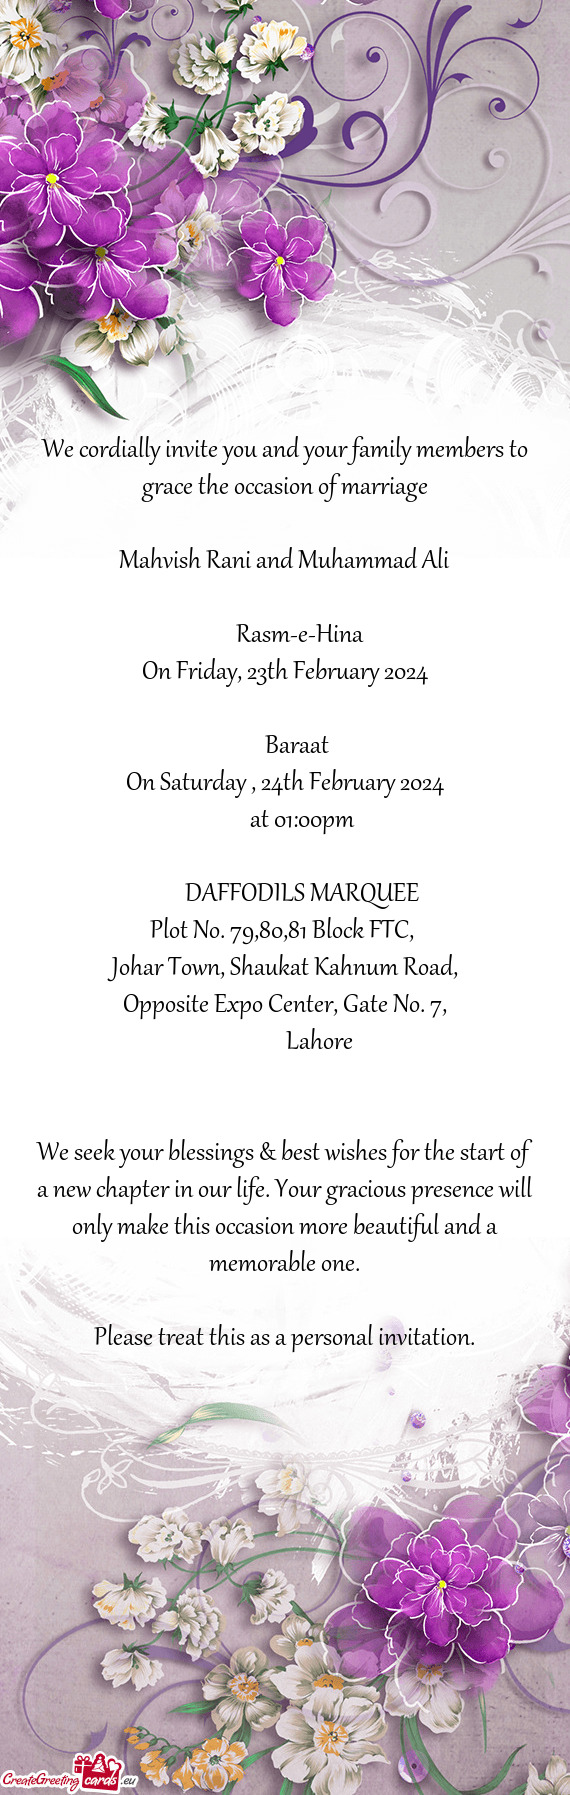 We cordially invite you and your family members to grace the occasion of marriage